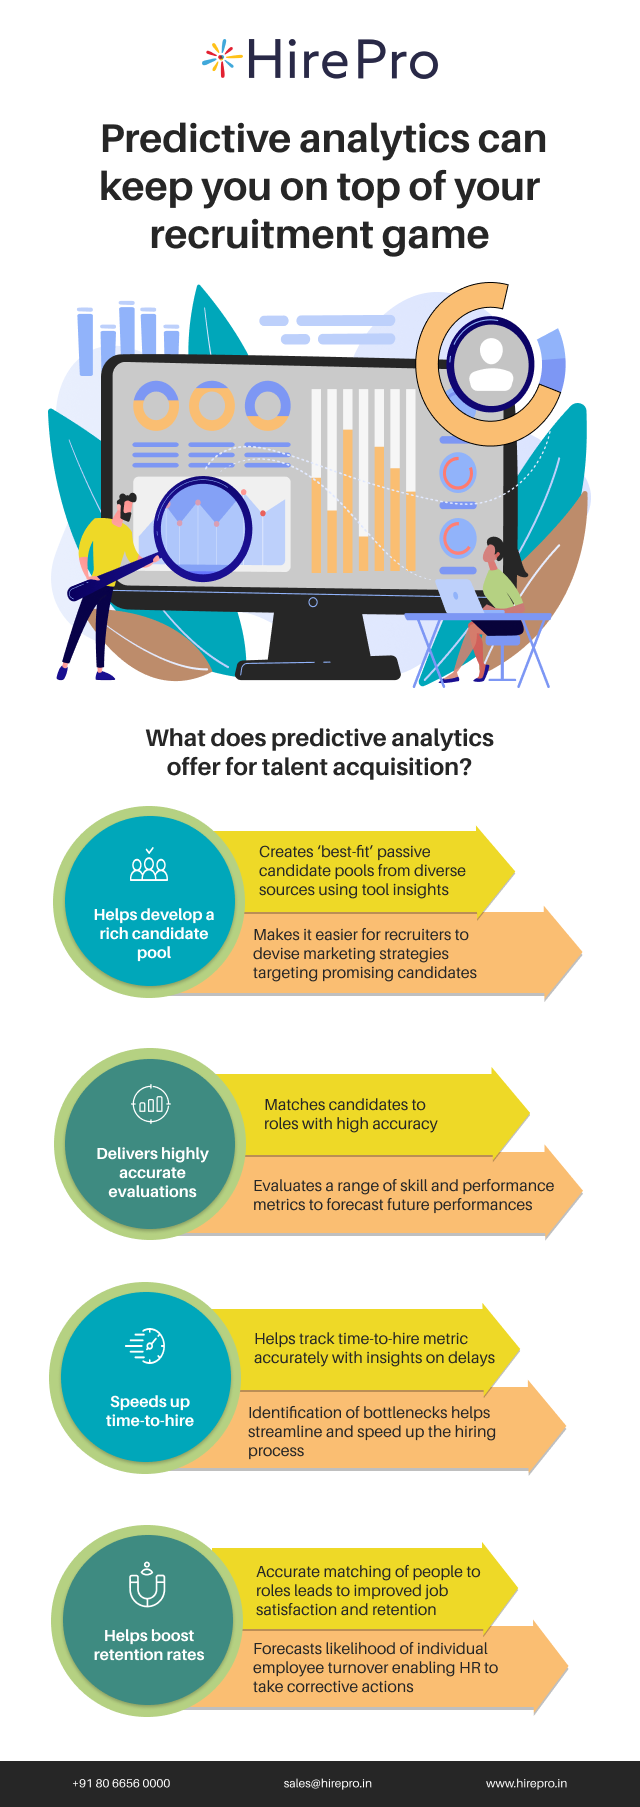 Predictive analytics can keep you on top of your recruitment game (1)